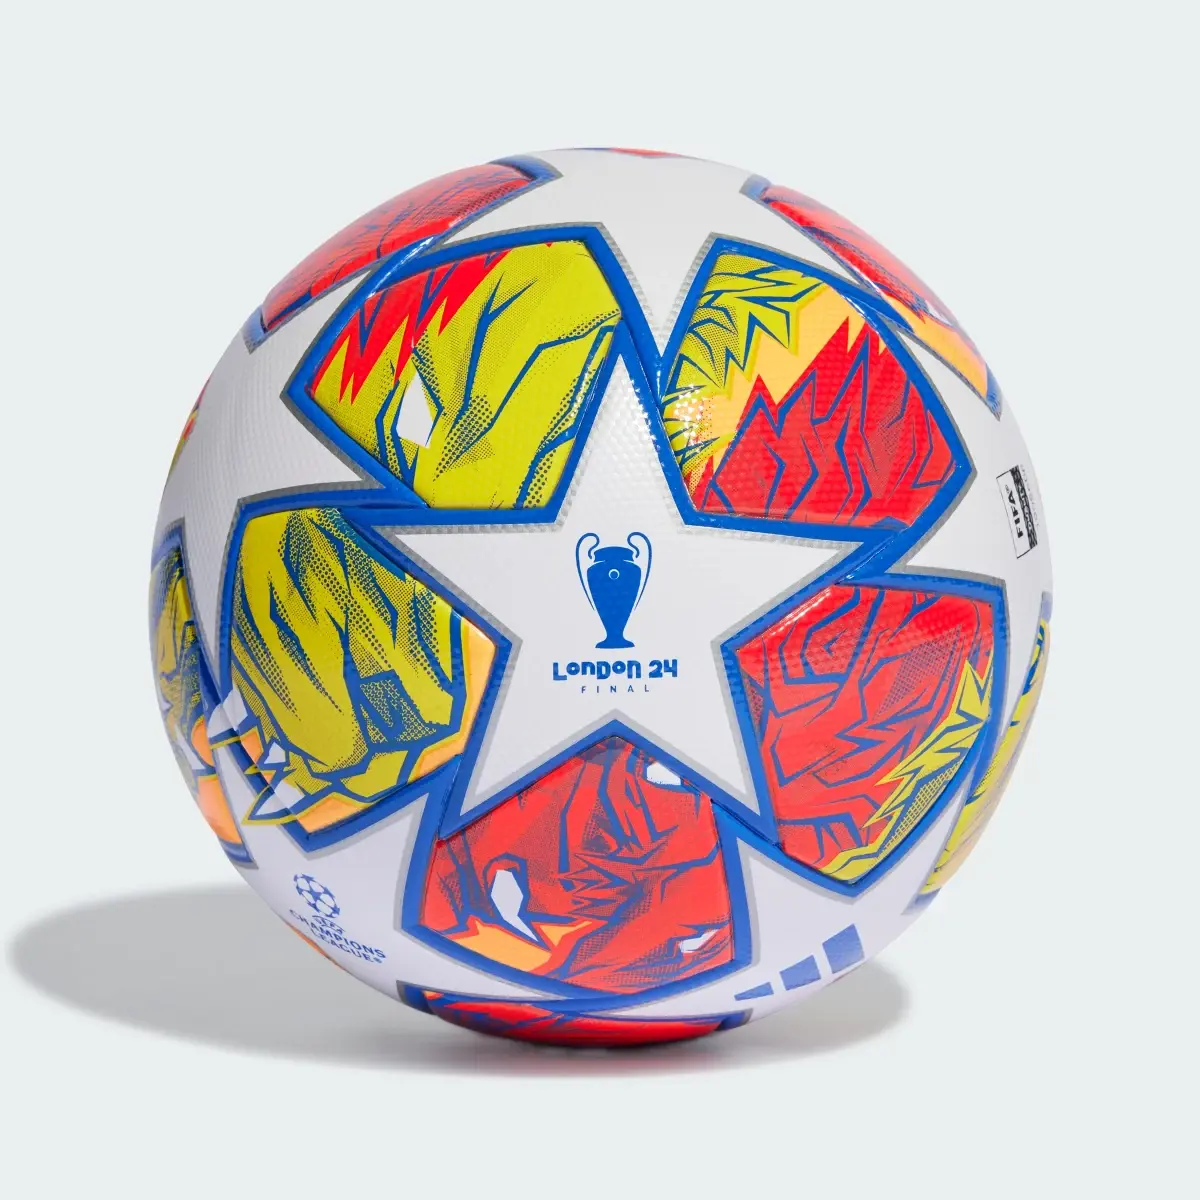 Adidas UCL League 23/24 Knock-out Ball. 3